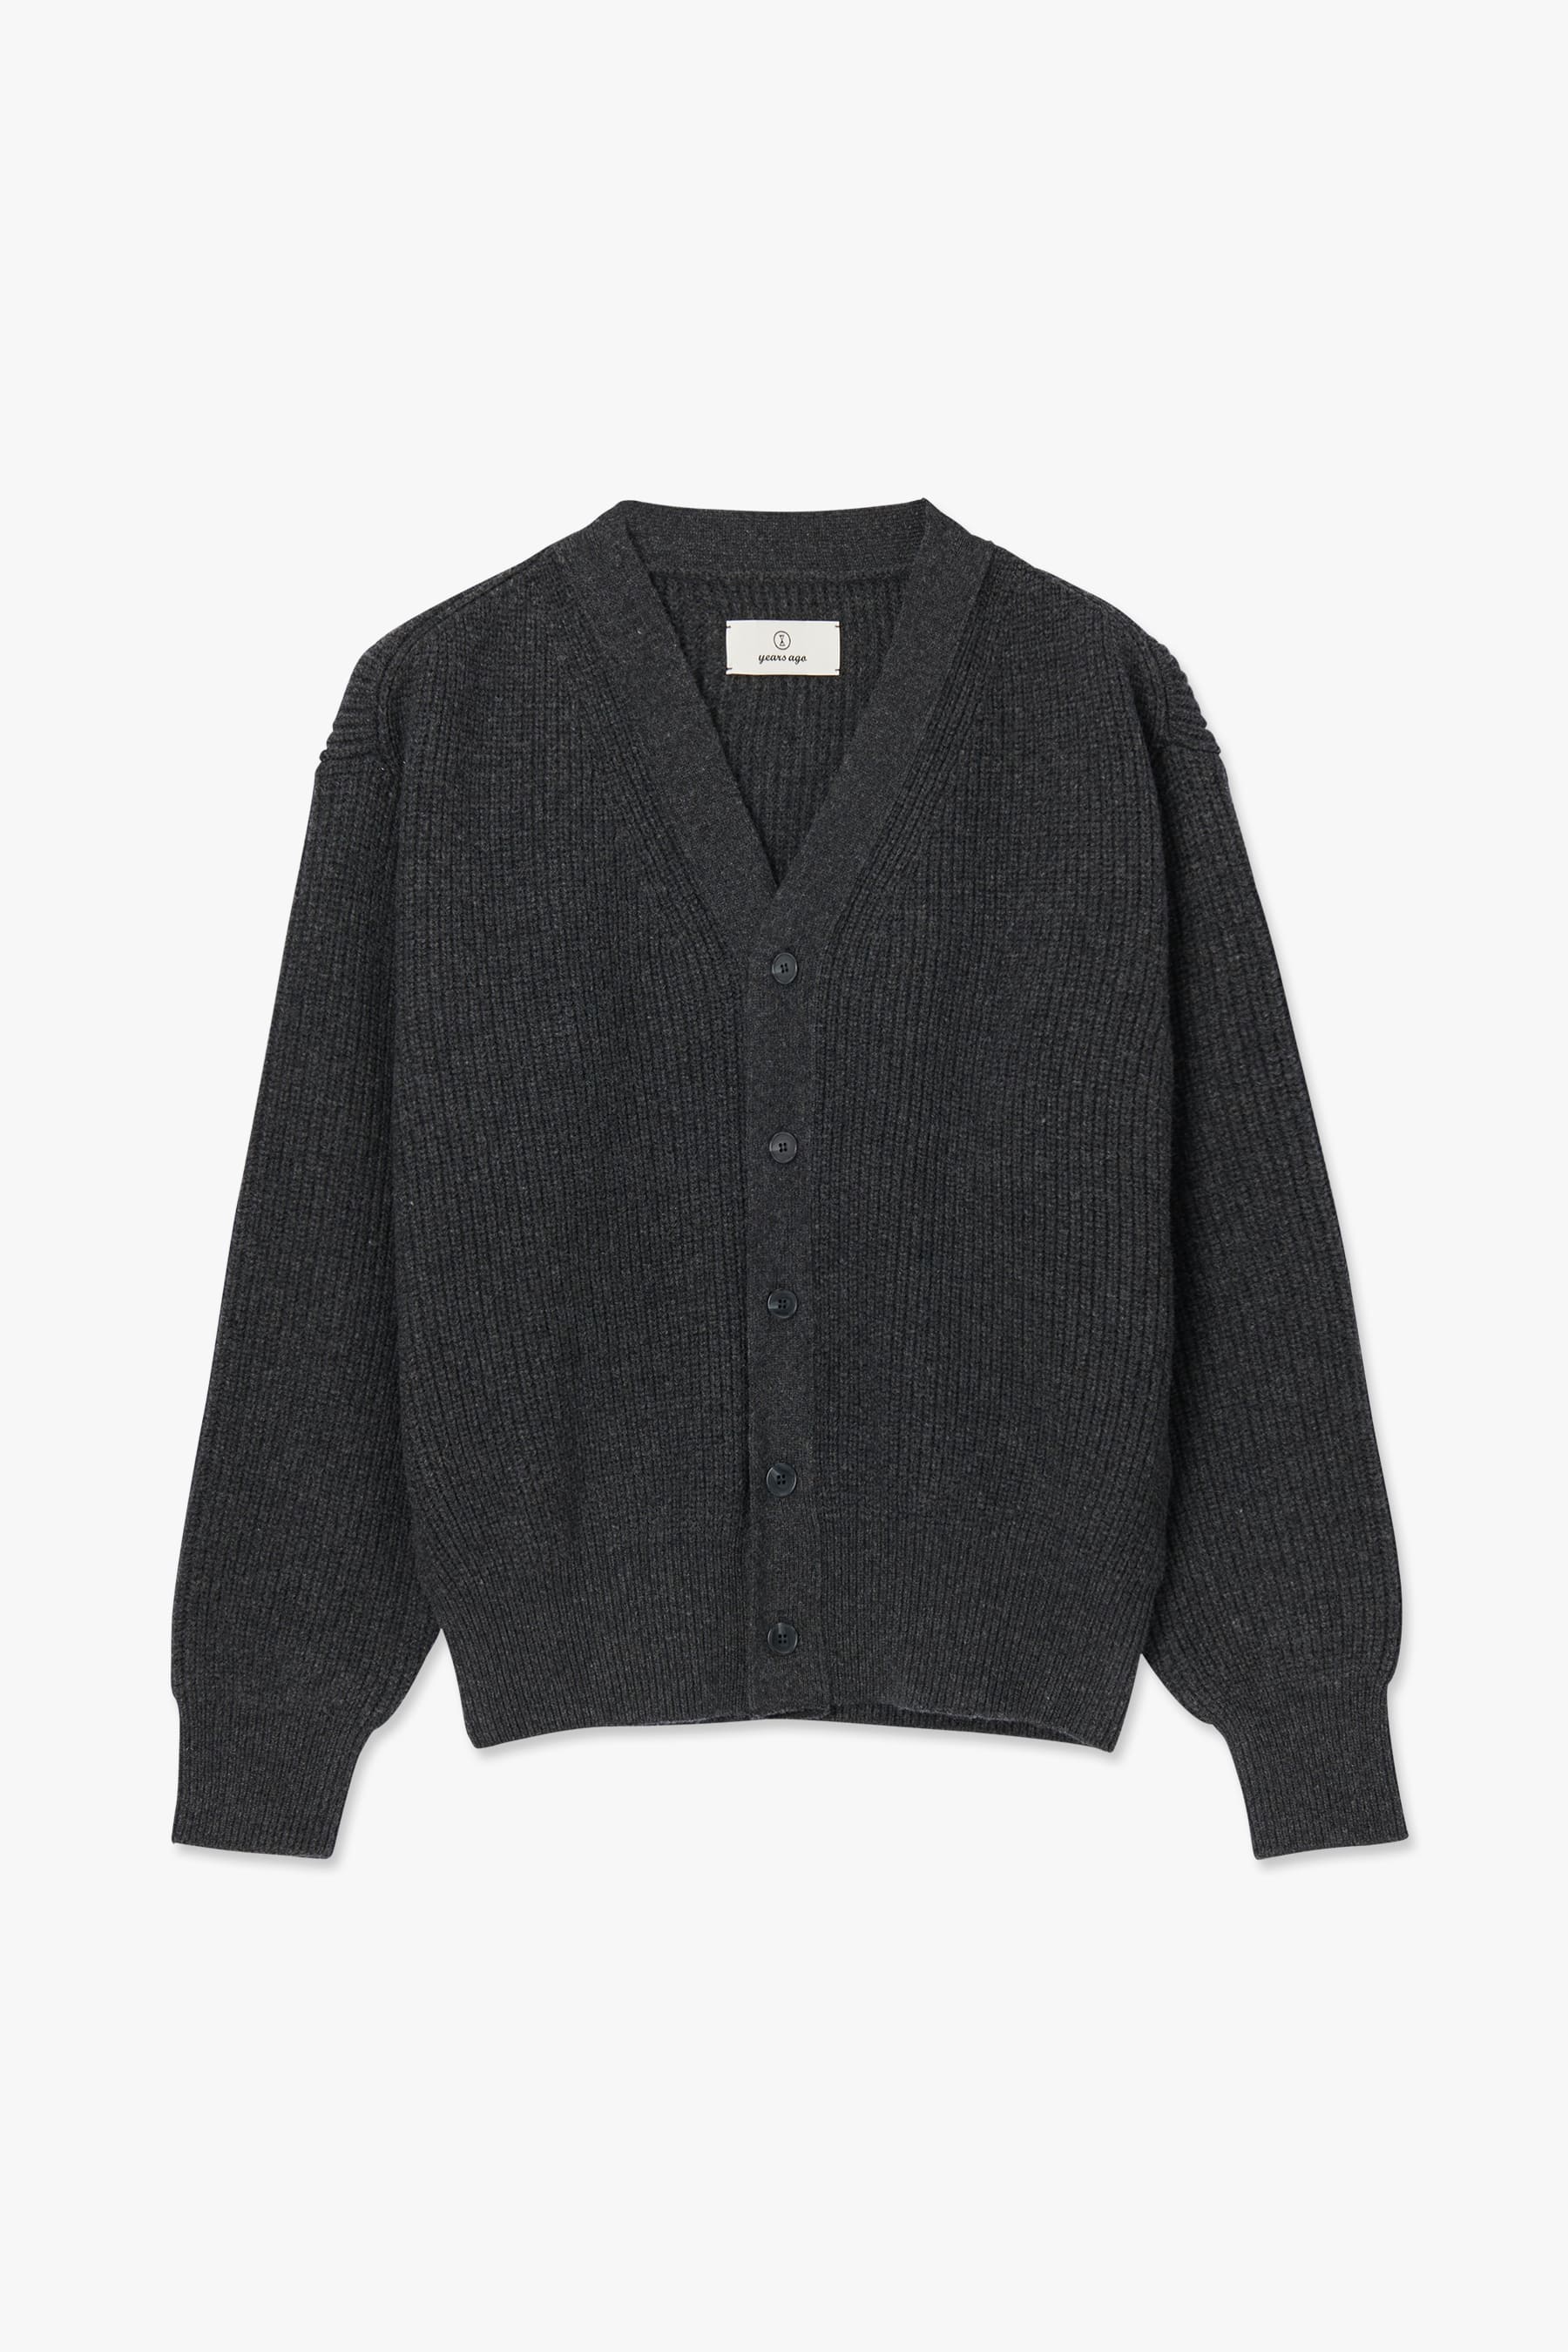 CHARCOAL ROVER WOOL CARDIGAN 01-2